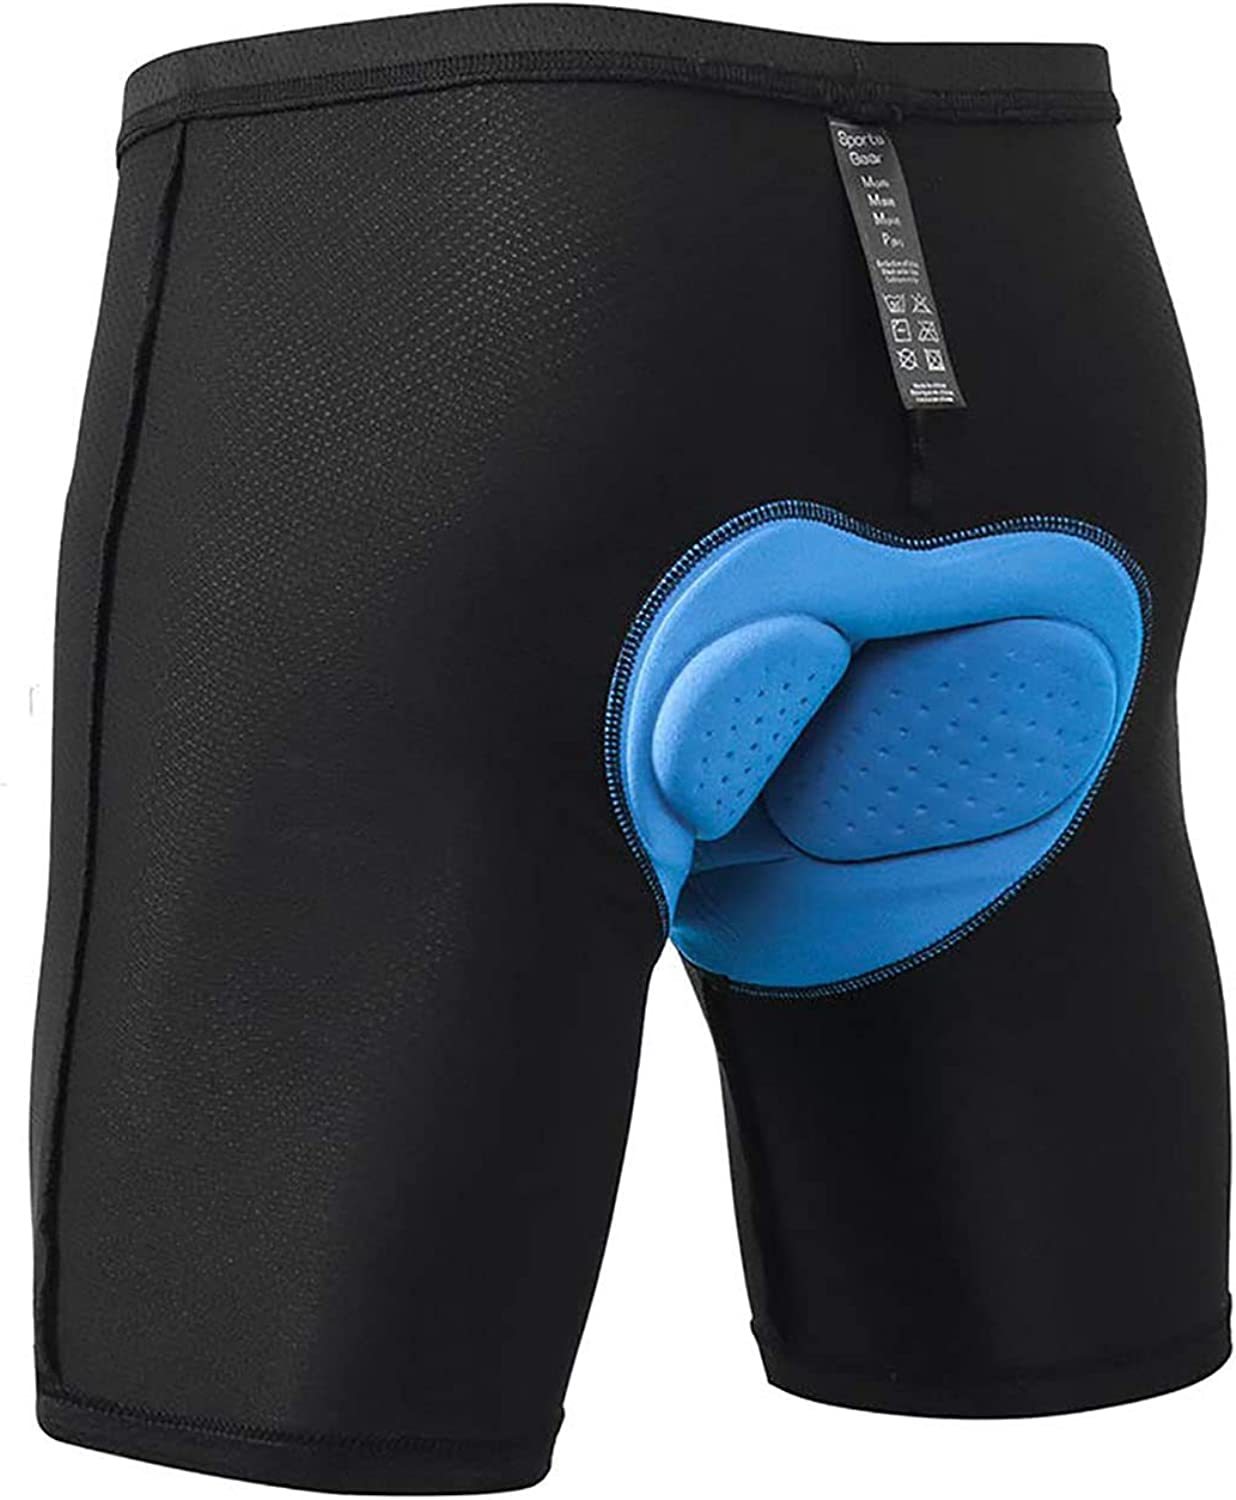 Men's Cycling Shorts 3D Padded Bike Bicycle Tights, Breathable & Absorbent